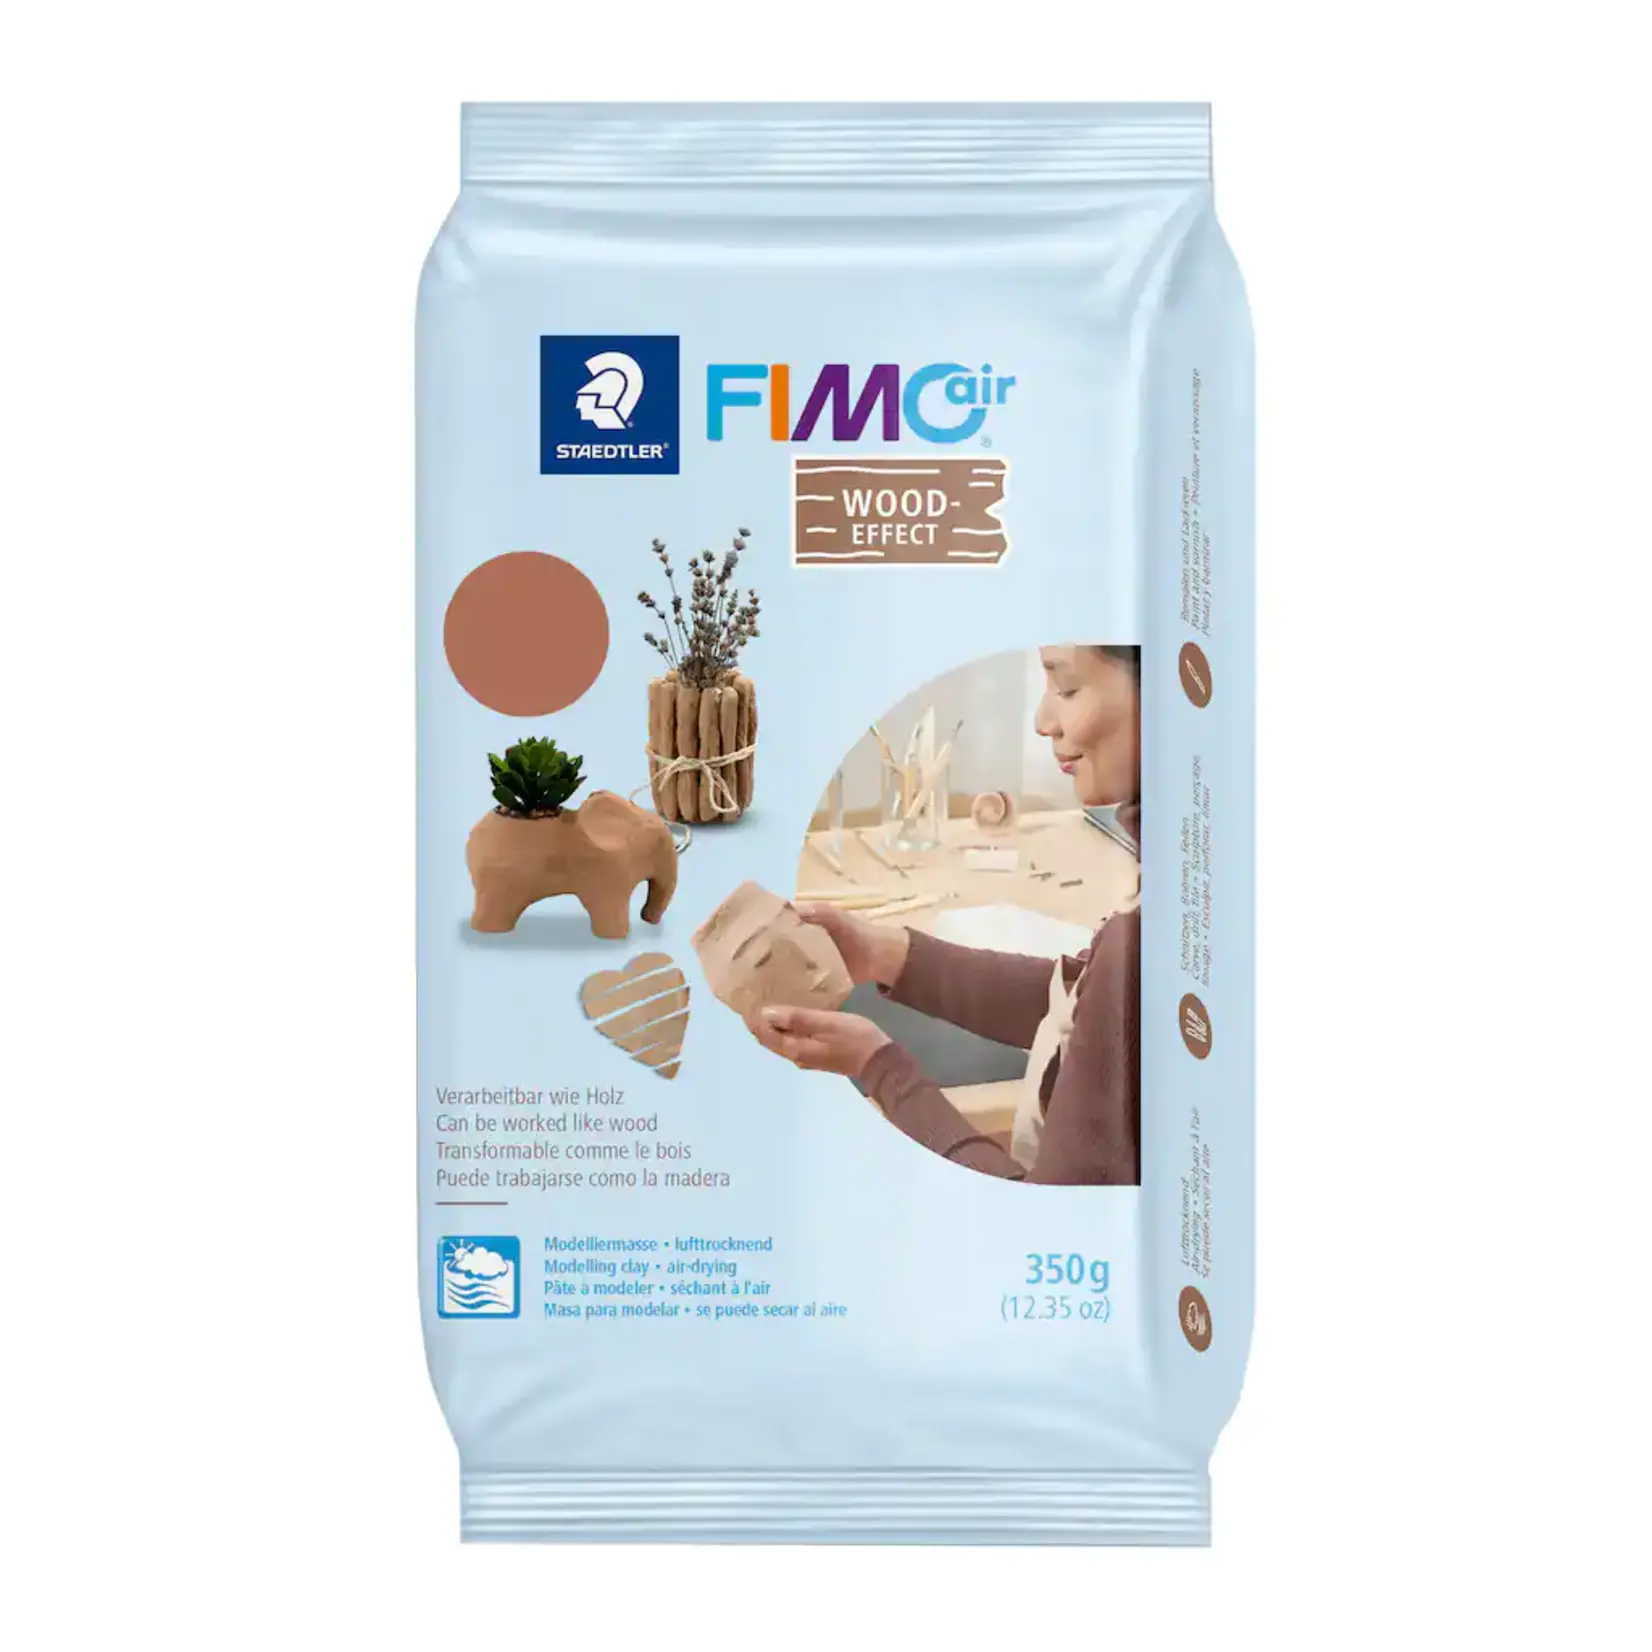 FIMO AIR MODELING CLAY 1.1LB WOOD - The Gilded Rabbit